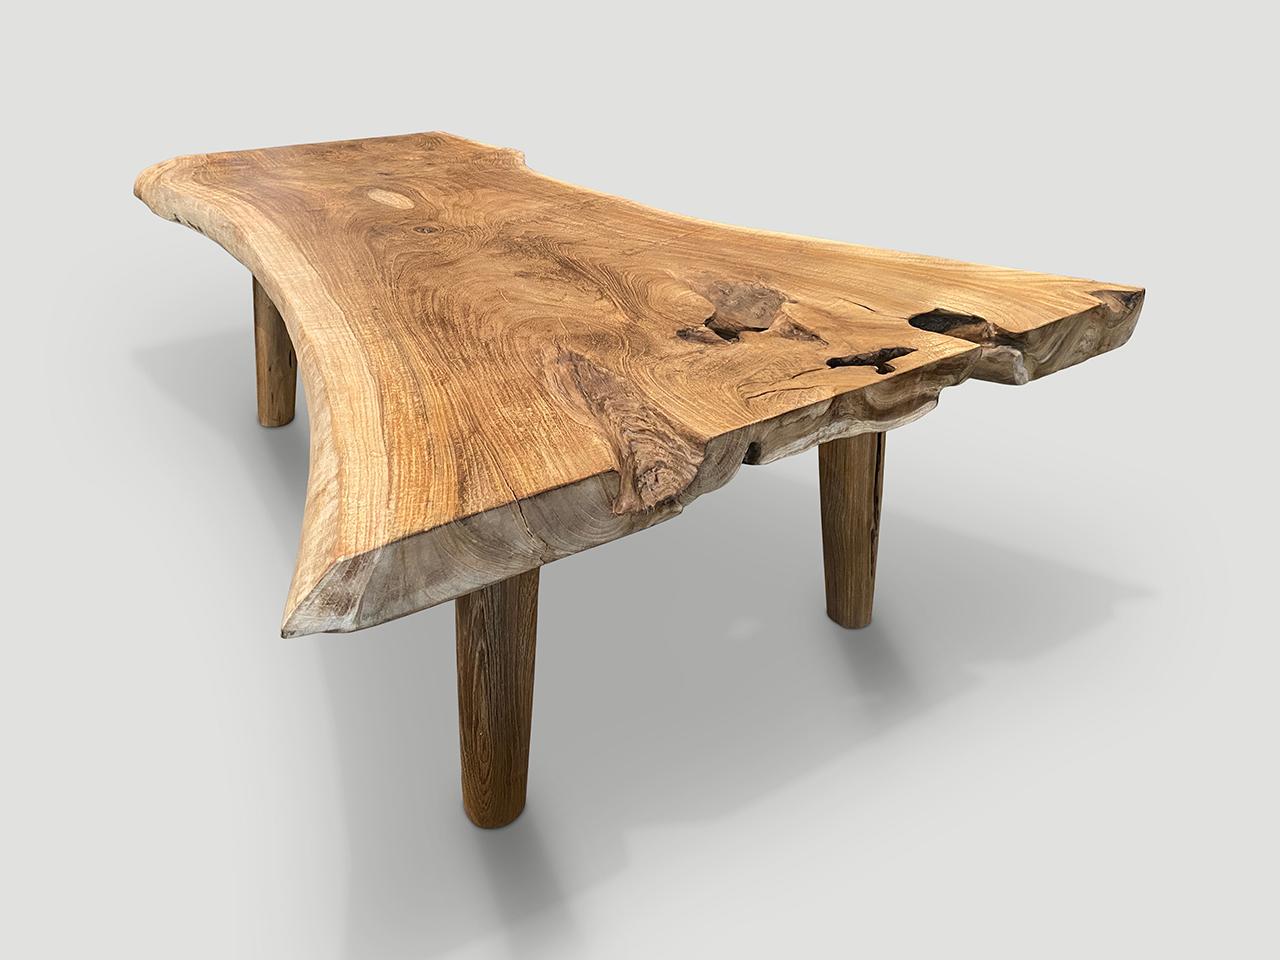 Impressive reclaimed teak wood live edge single slab coffee table. We added minimalist cylinder legs. Finished in a natural oil revealing the beautiful wood grain.

Own an Andrianna Shamaris original.

Andrianna Shamaris. The Leader In Modern